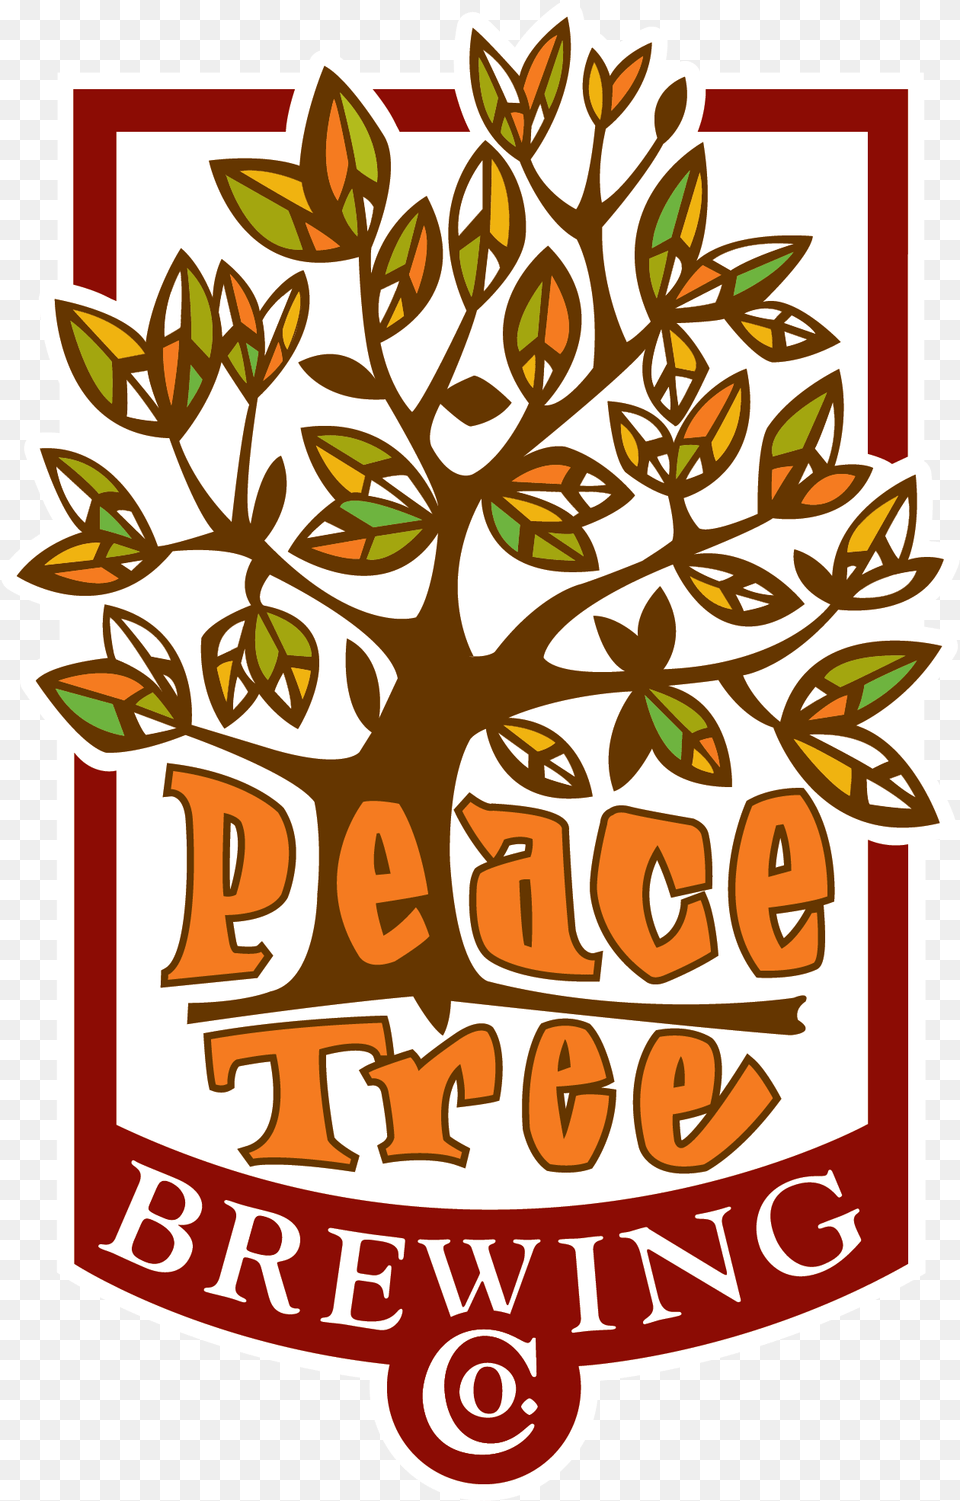 Peace Tree White Outline Logo Peace Tree Brewing Logo, Sticker, Dynamite, Weapon, Text Png